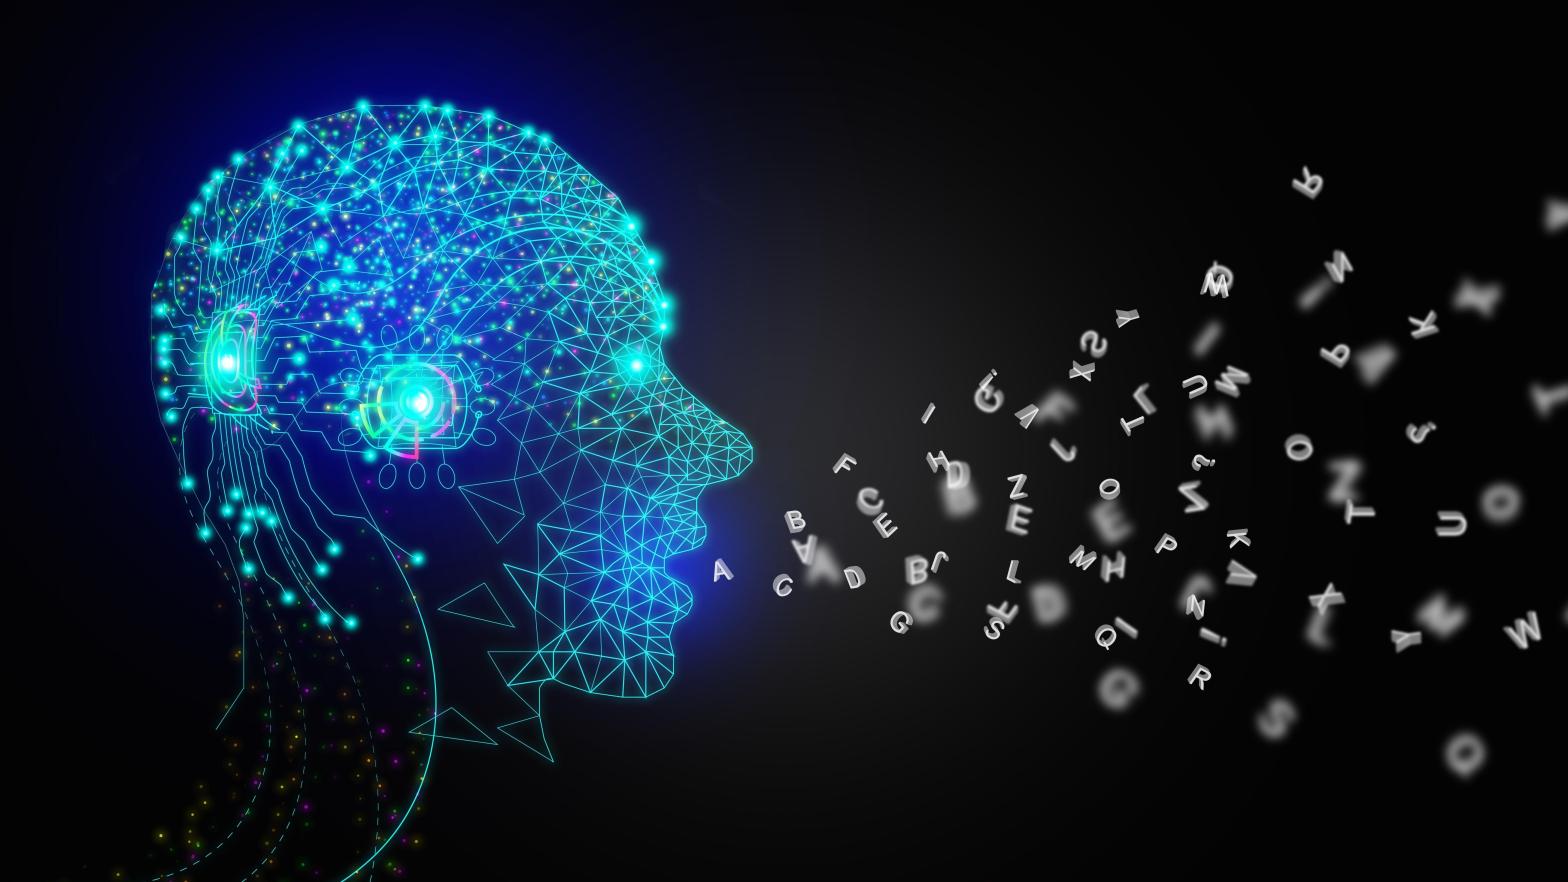 Modern AI systems are inherently iterative. All the content they produce is based on their training data, and they do not actually comprehend the information they create.  (Image: Ole.CNX, Shutterstock)